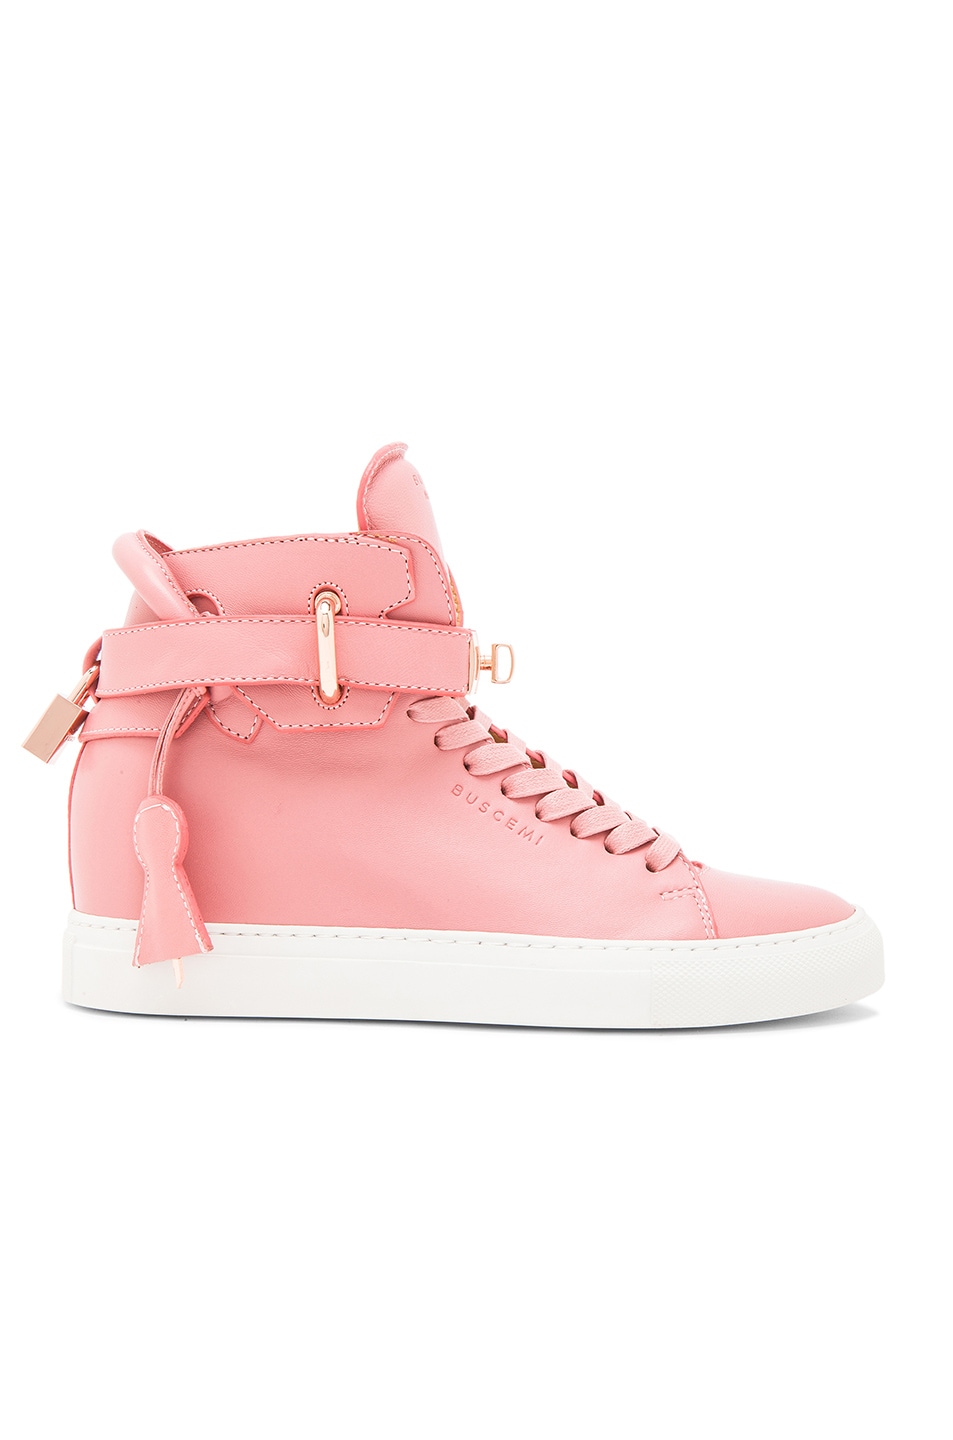 Image 1 of Buscemi 100MM Alta High Top Leather Sneakers in Coral